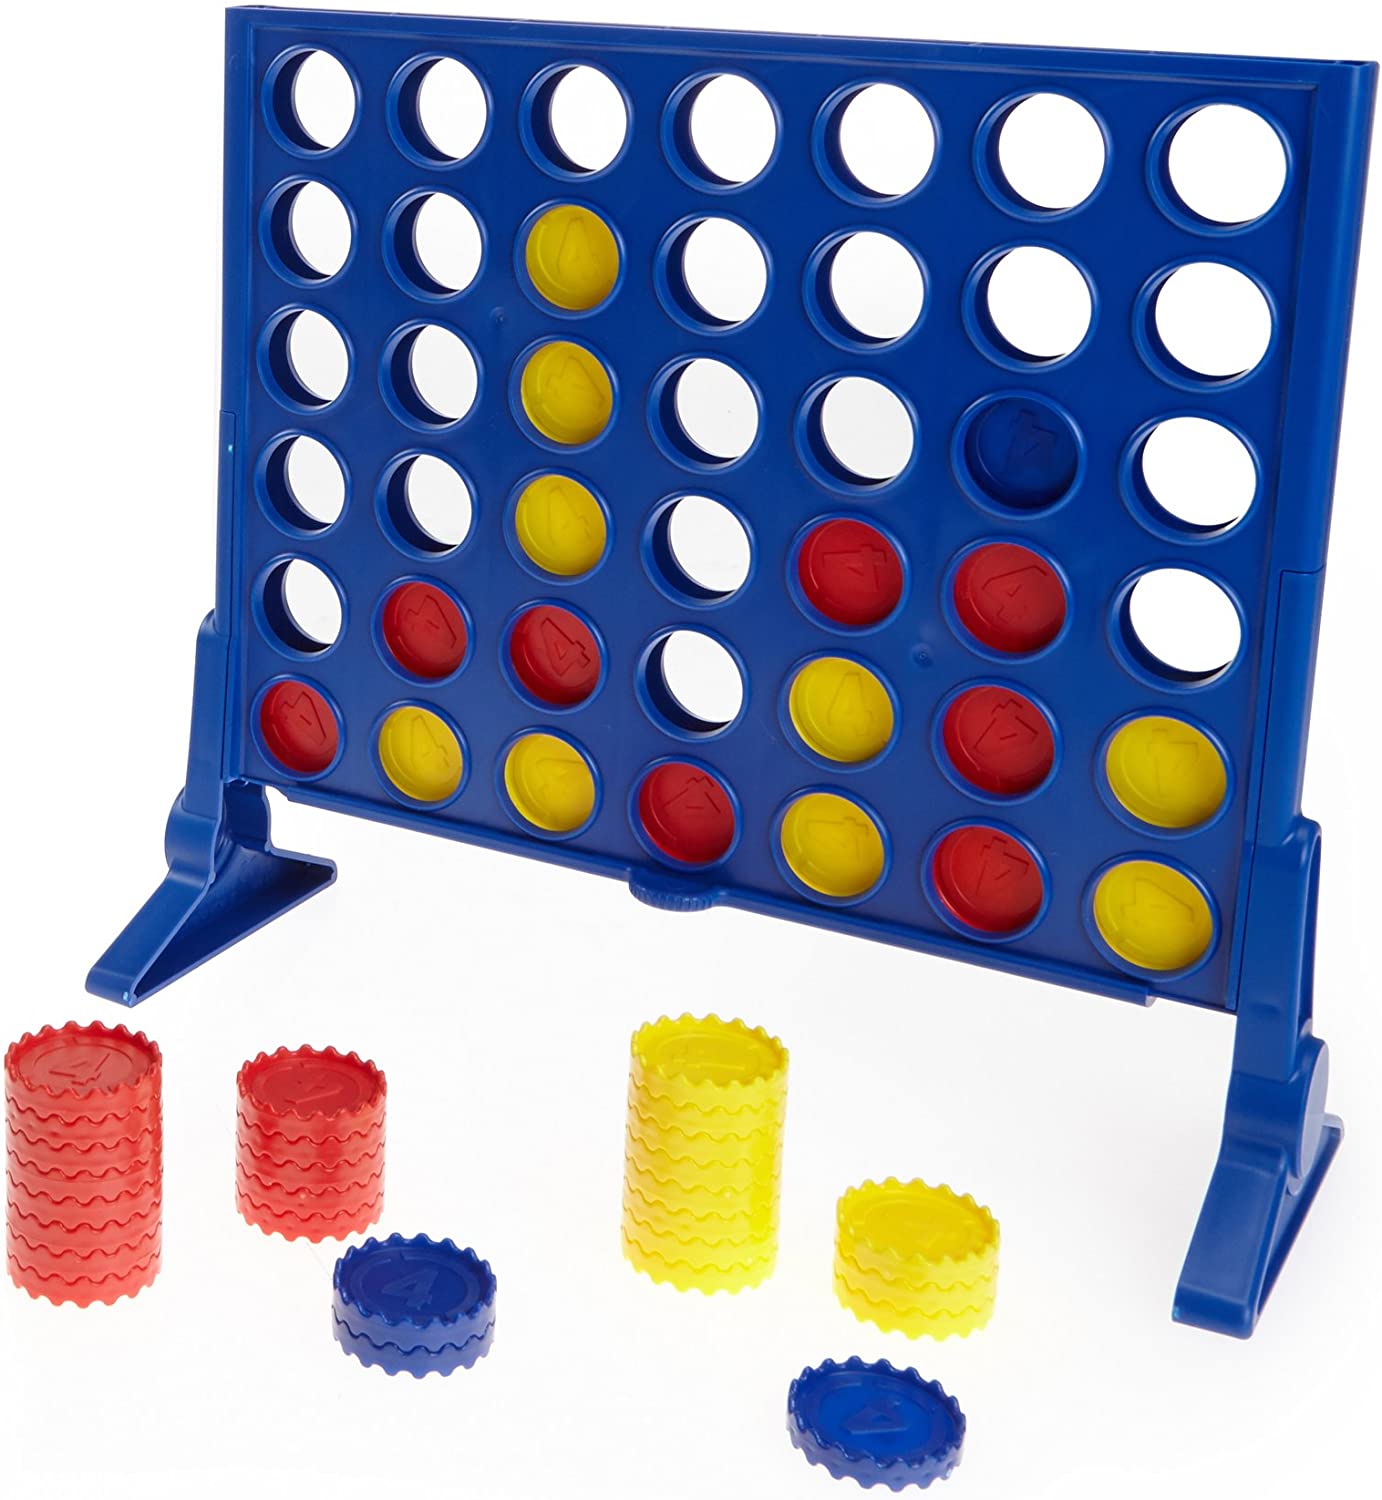 Connect 4 Strategy Board Game - for Kids Ages 6 and Up